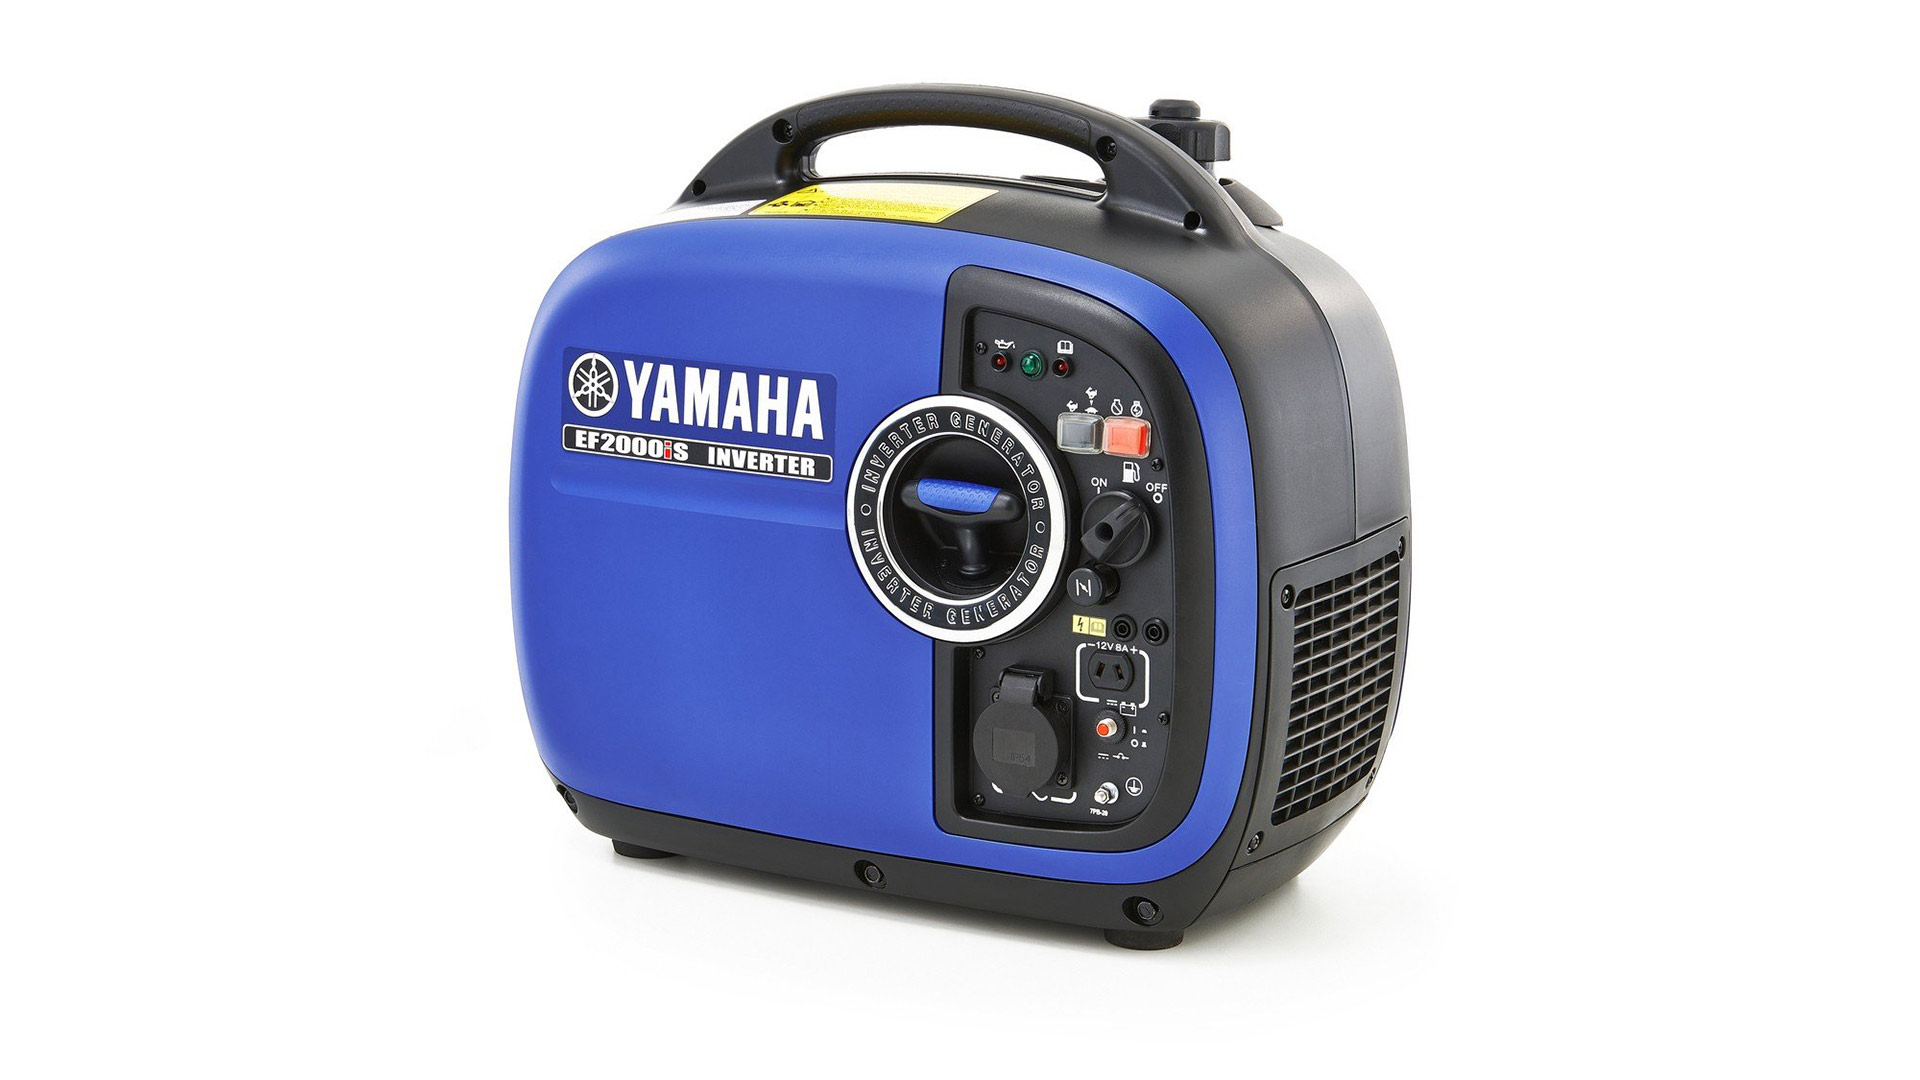 YAMAHA EF2000IS GENERATOR  - PURE CLEAN POWER:
The EF2000IS gives you the finest quality power up to 2Kva. This Invertor-type with economy controls regulates the RPM against the actual load running.